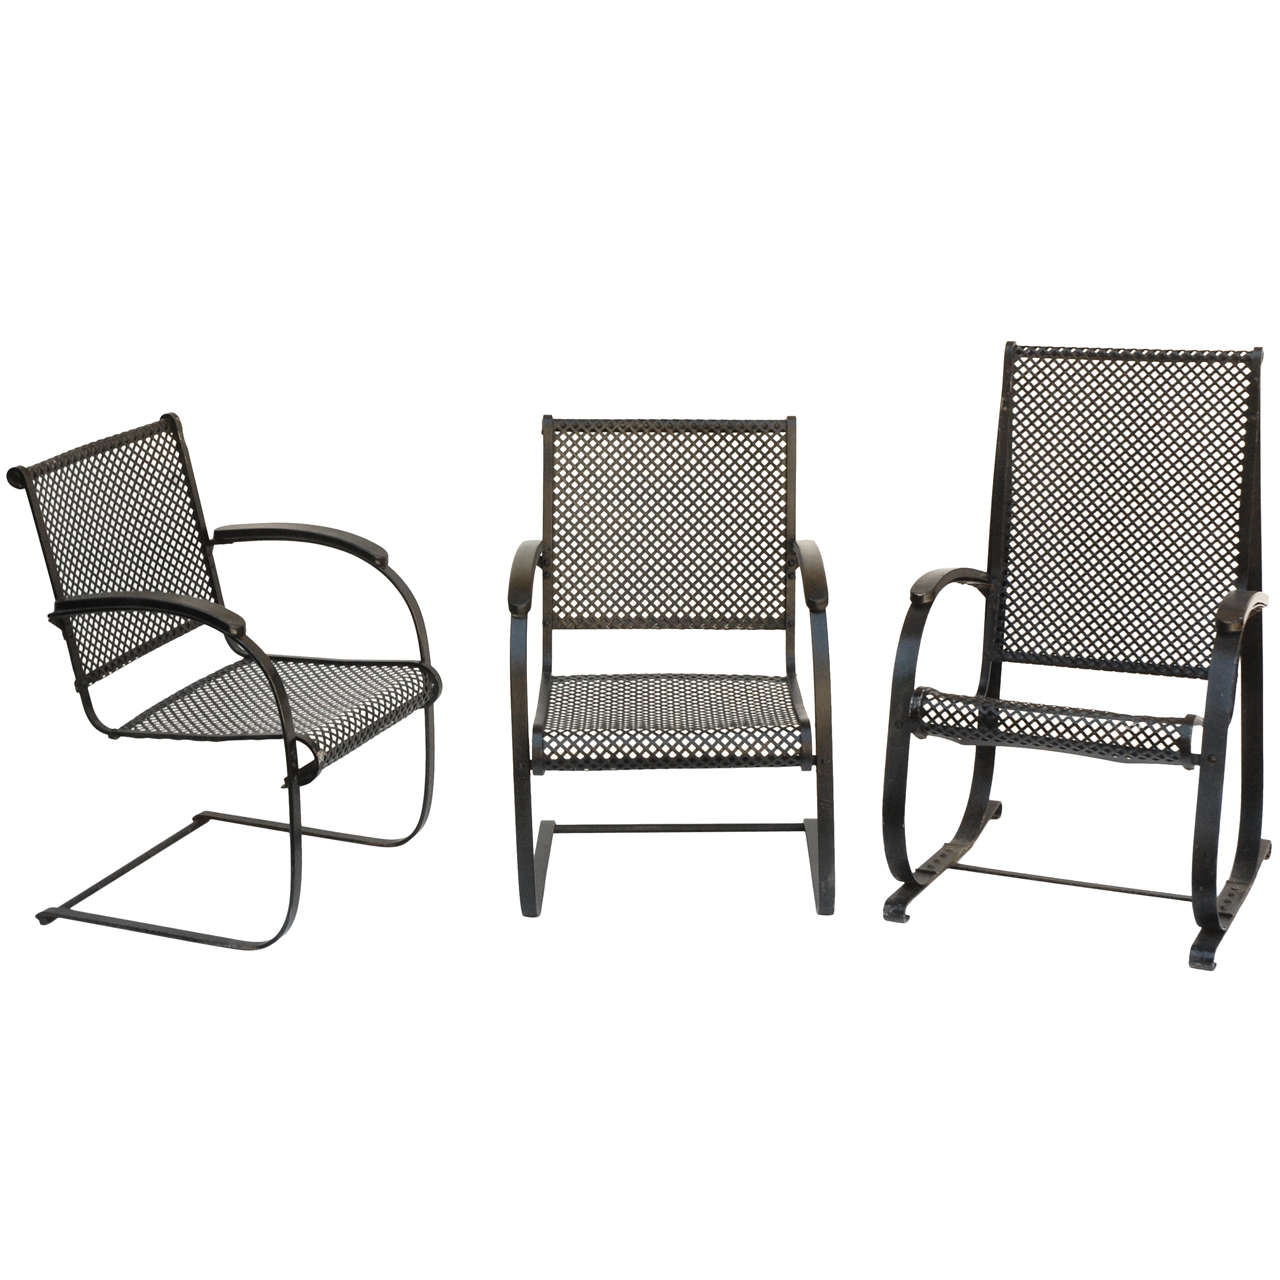 Suite of Three 1940's Iron Garden "Bouncer" Chairs For Sale